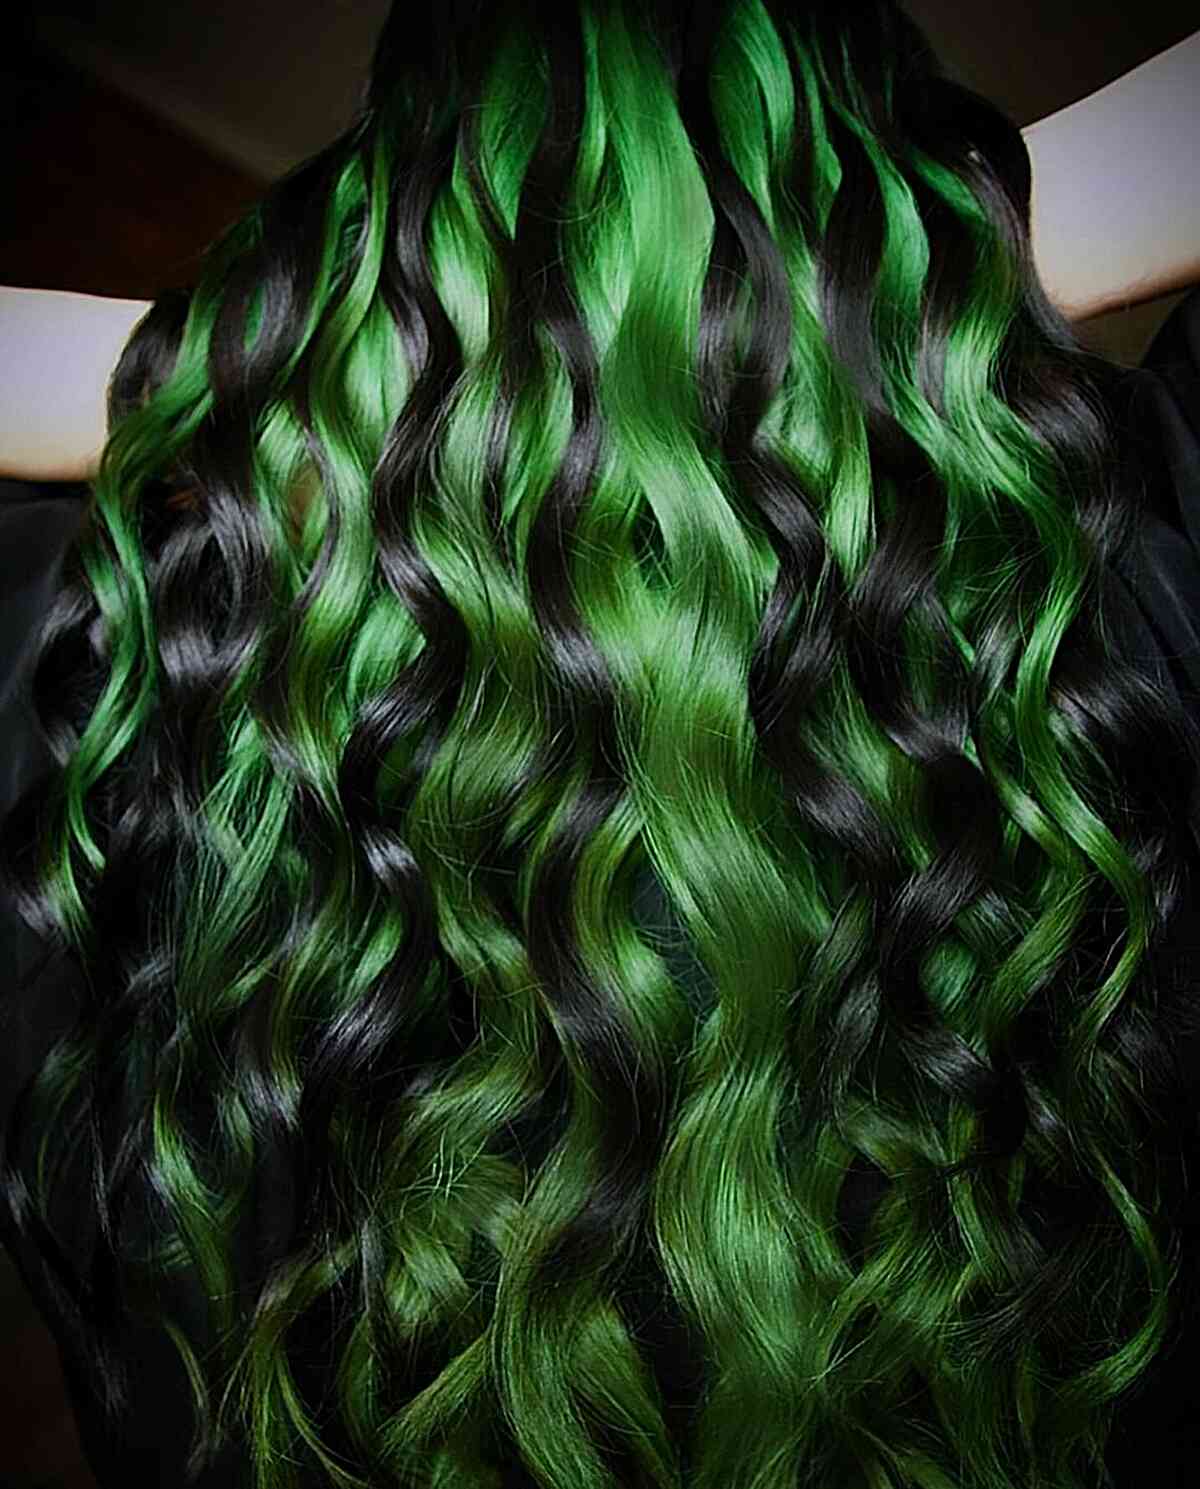 Green and Black Curled Hair